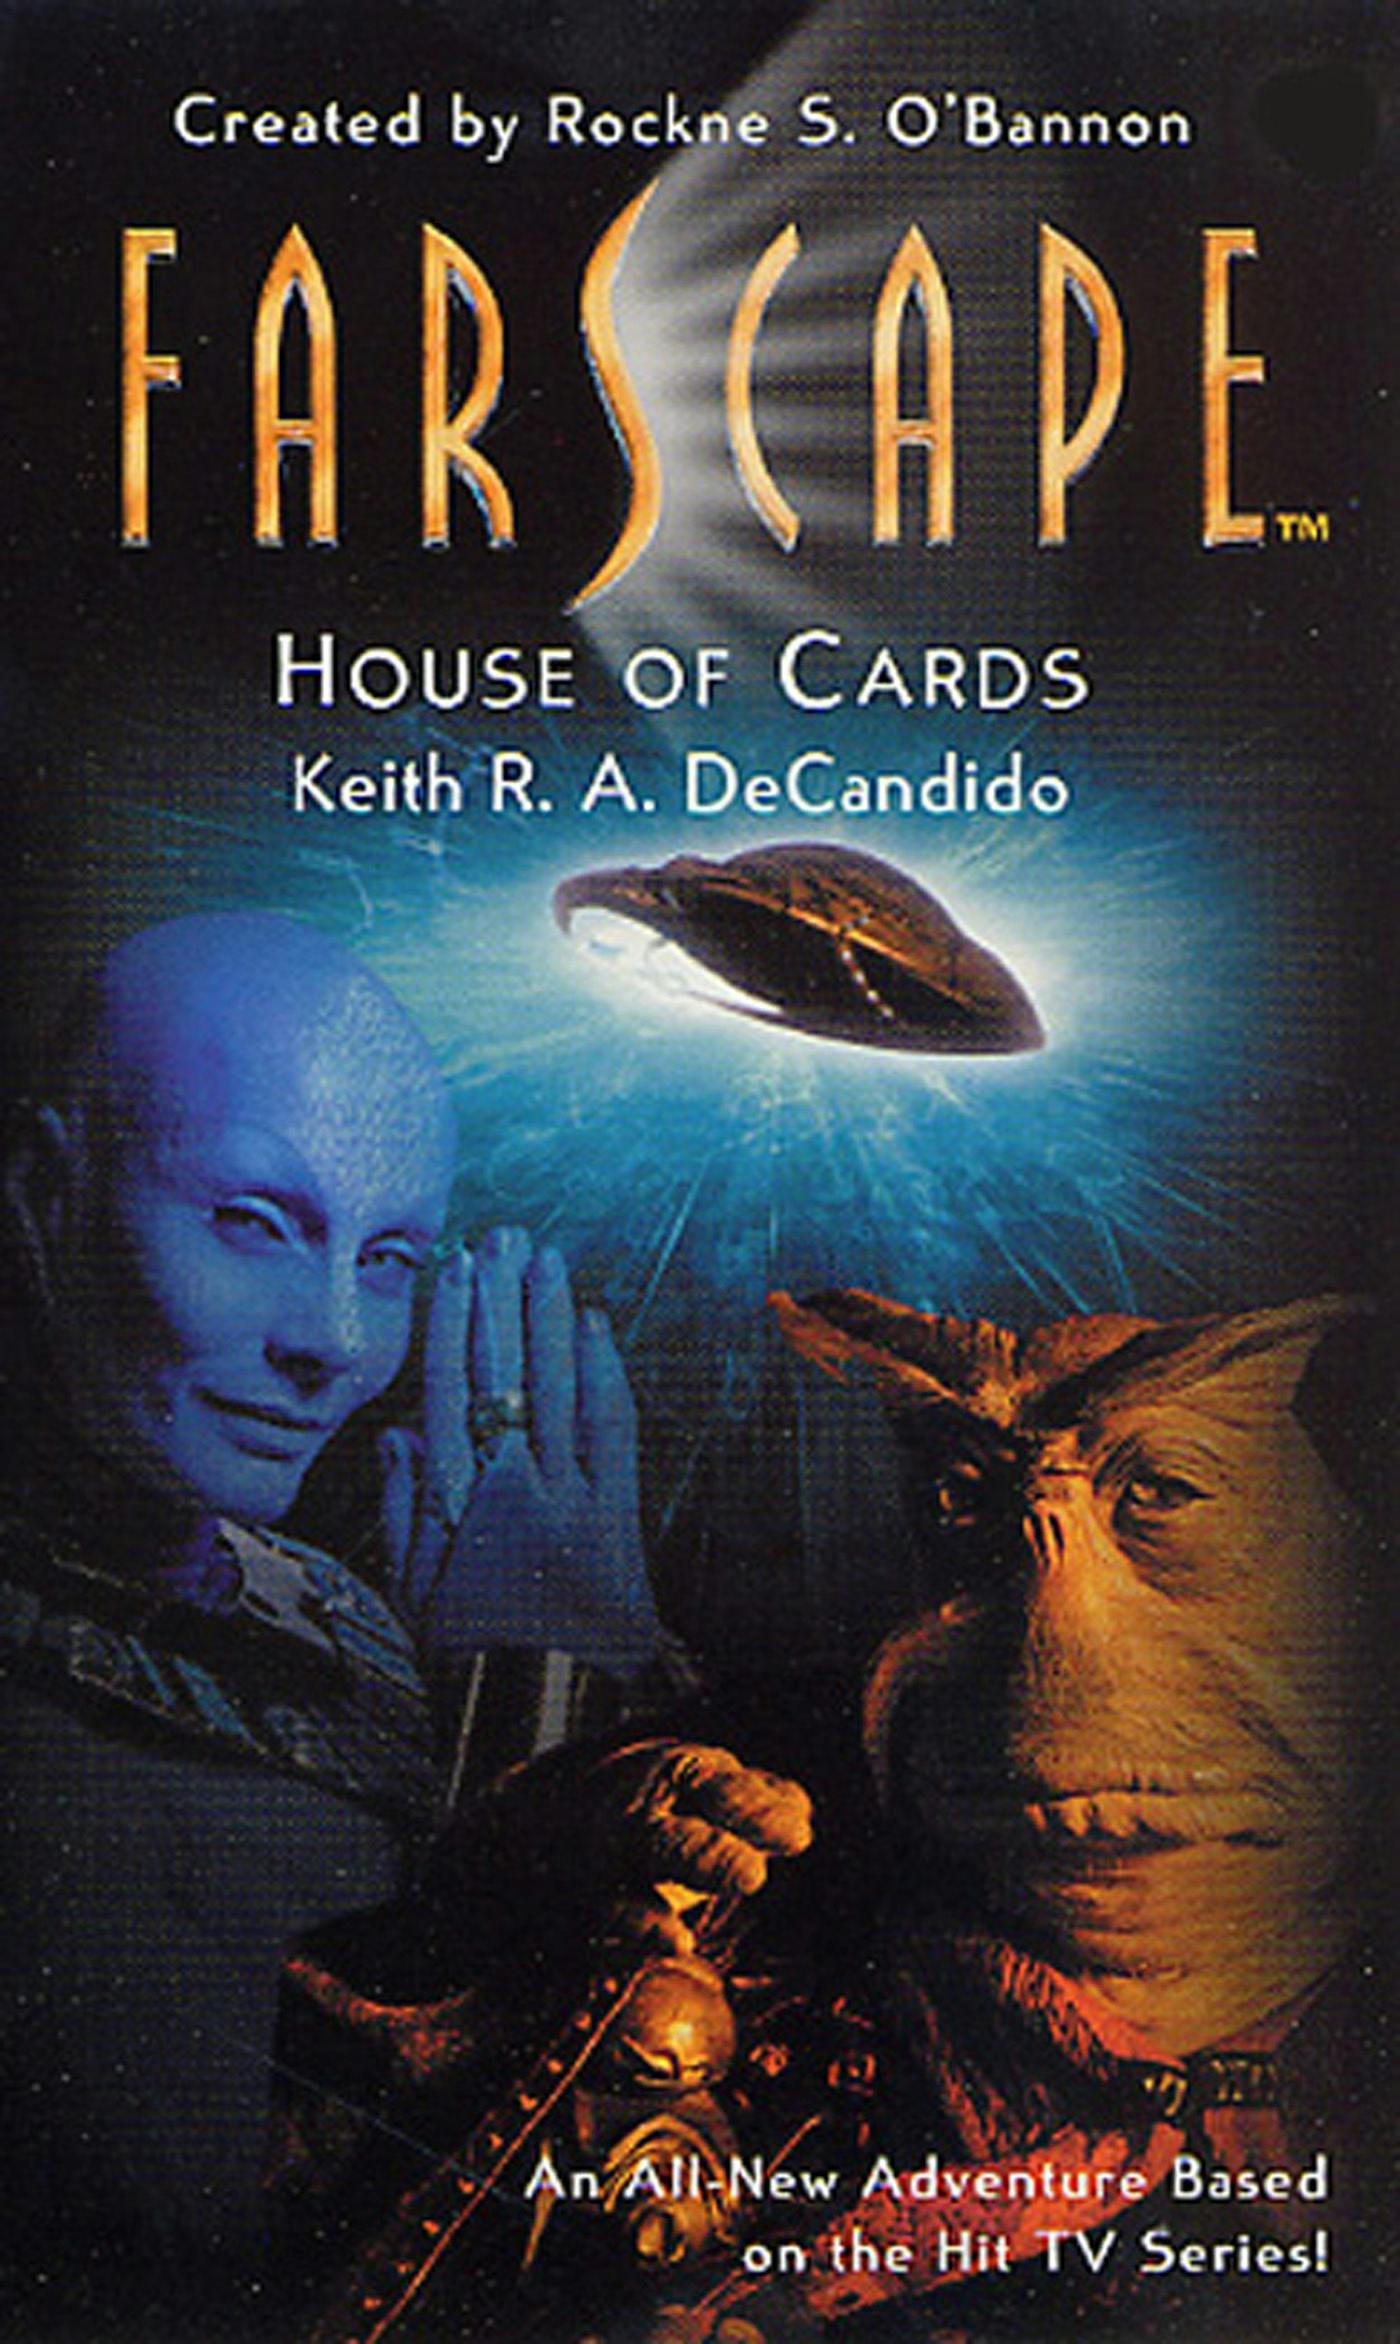 Image of Farscape: House of Cards